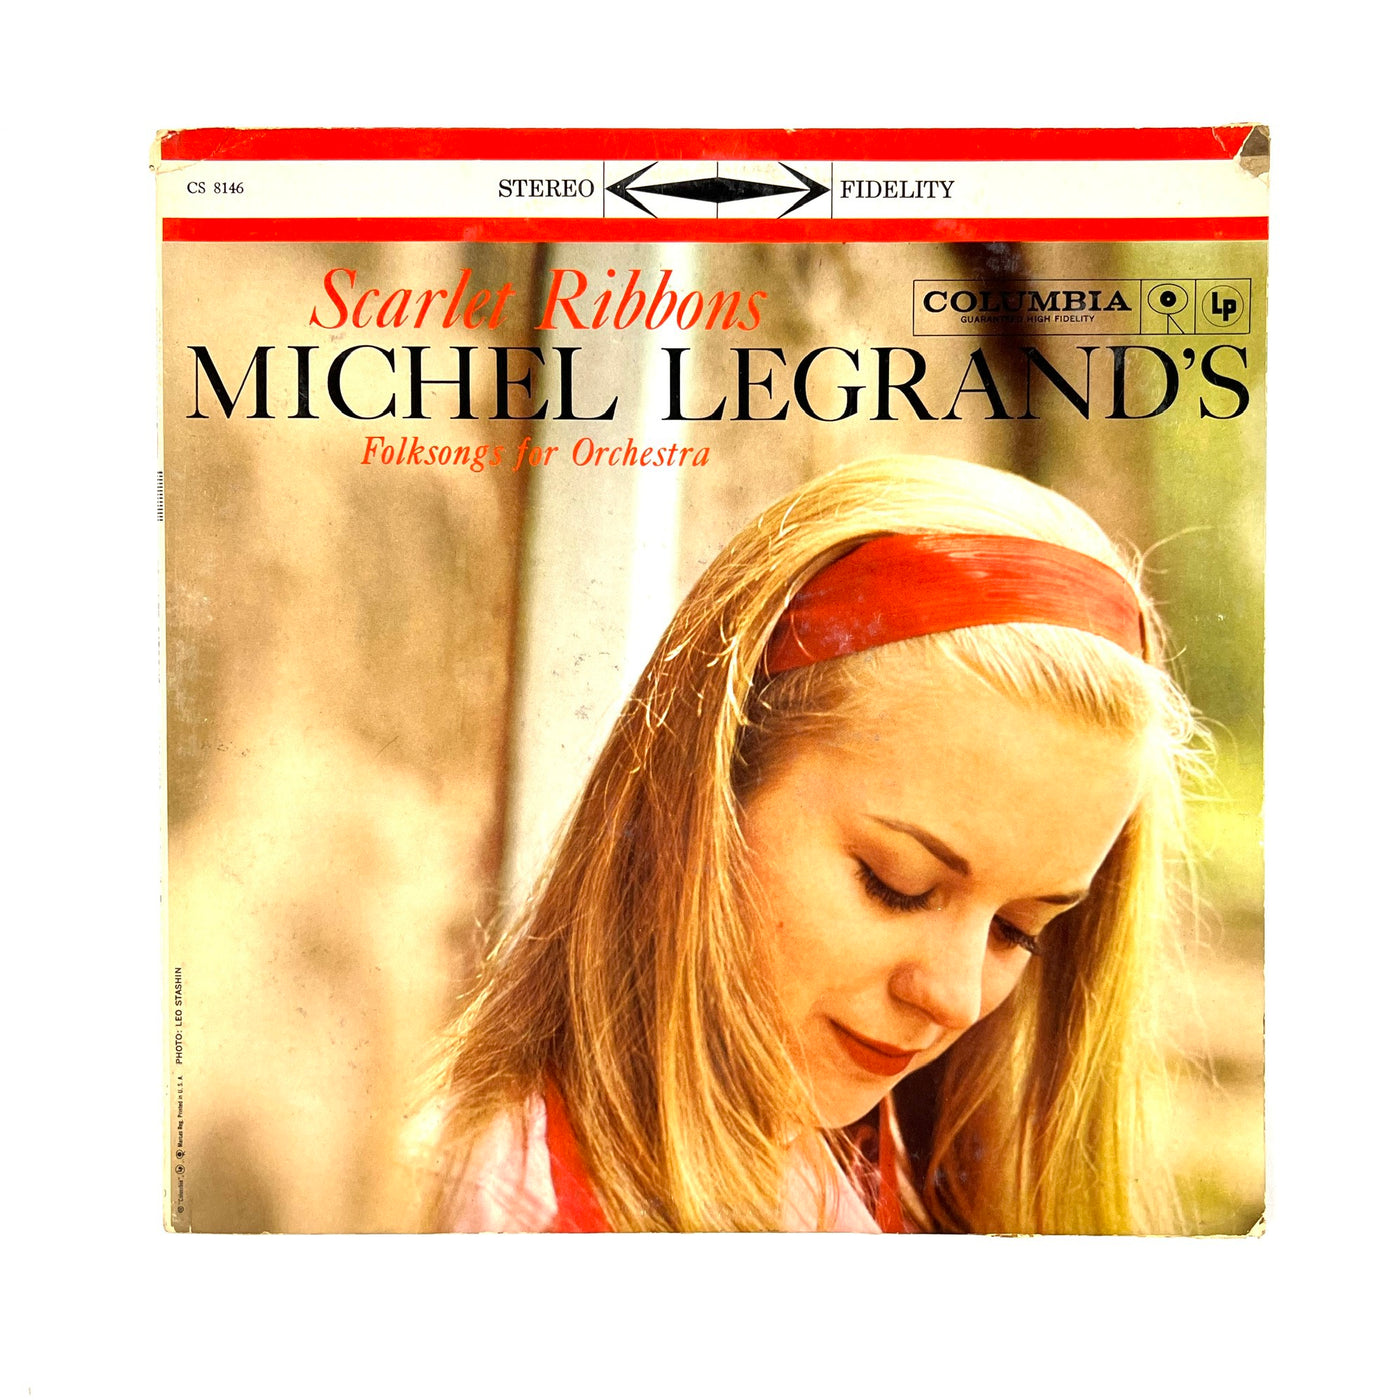 Michel Legrand Et Son Orchestre - Scarlet Ribbons - Michel Legrand's Folksongs For Orchestra